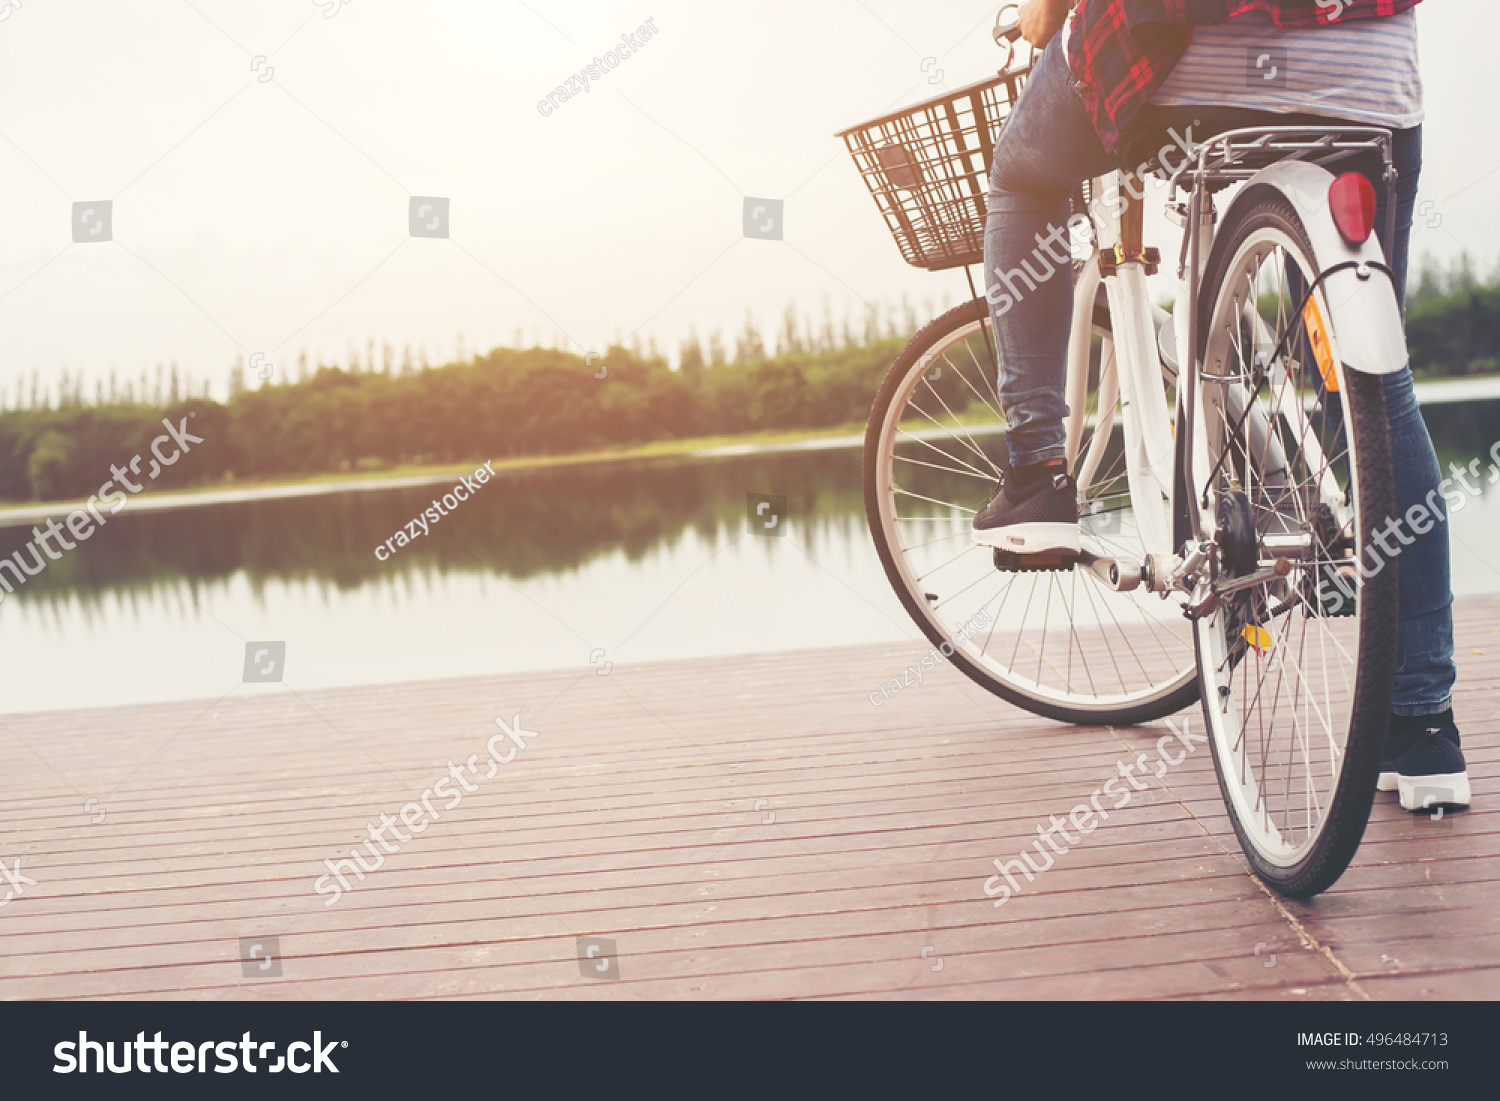 Close-up of young hipster woman holding her foot on bicycle pedal. #496484713